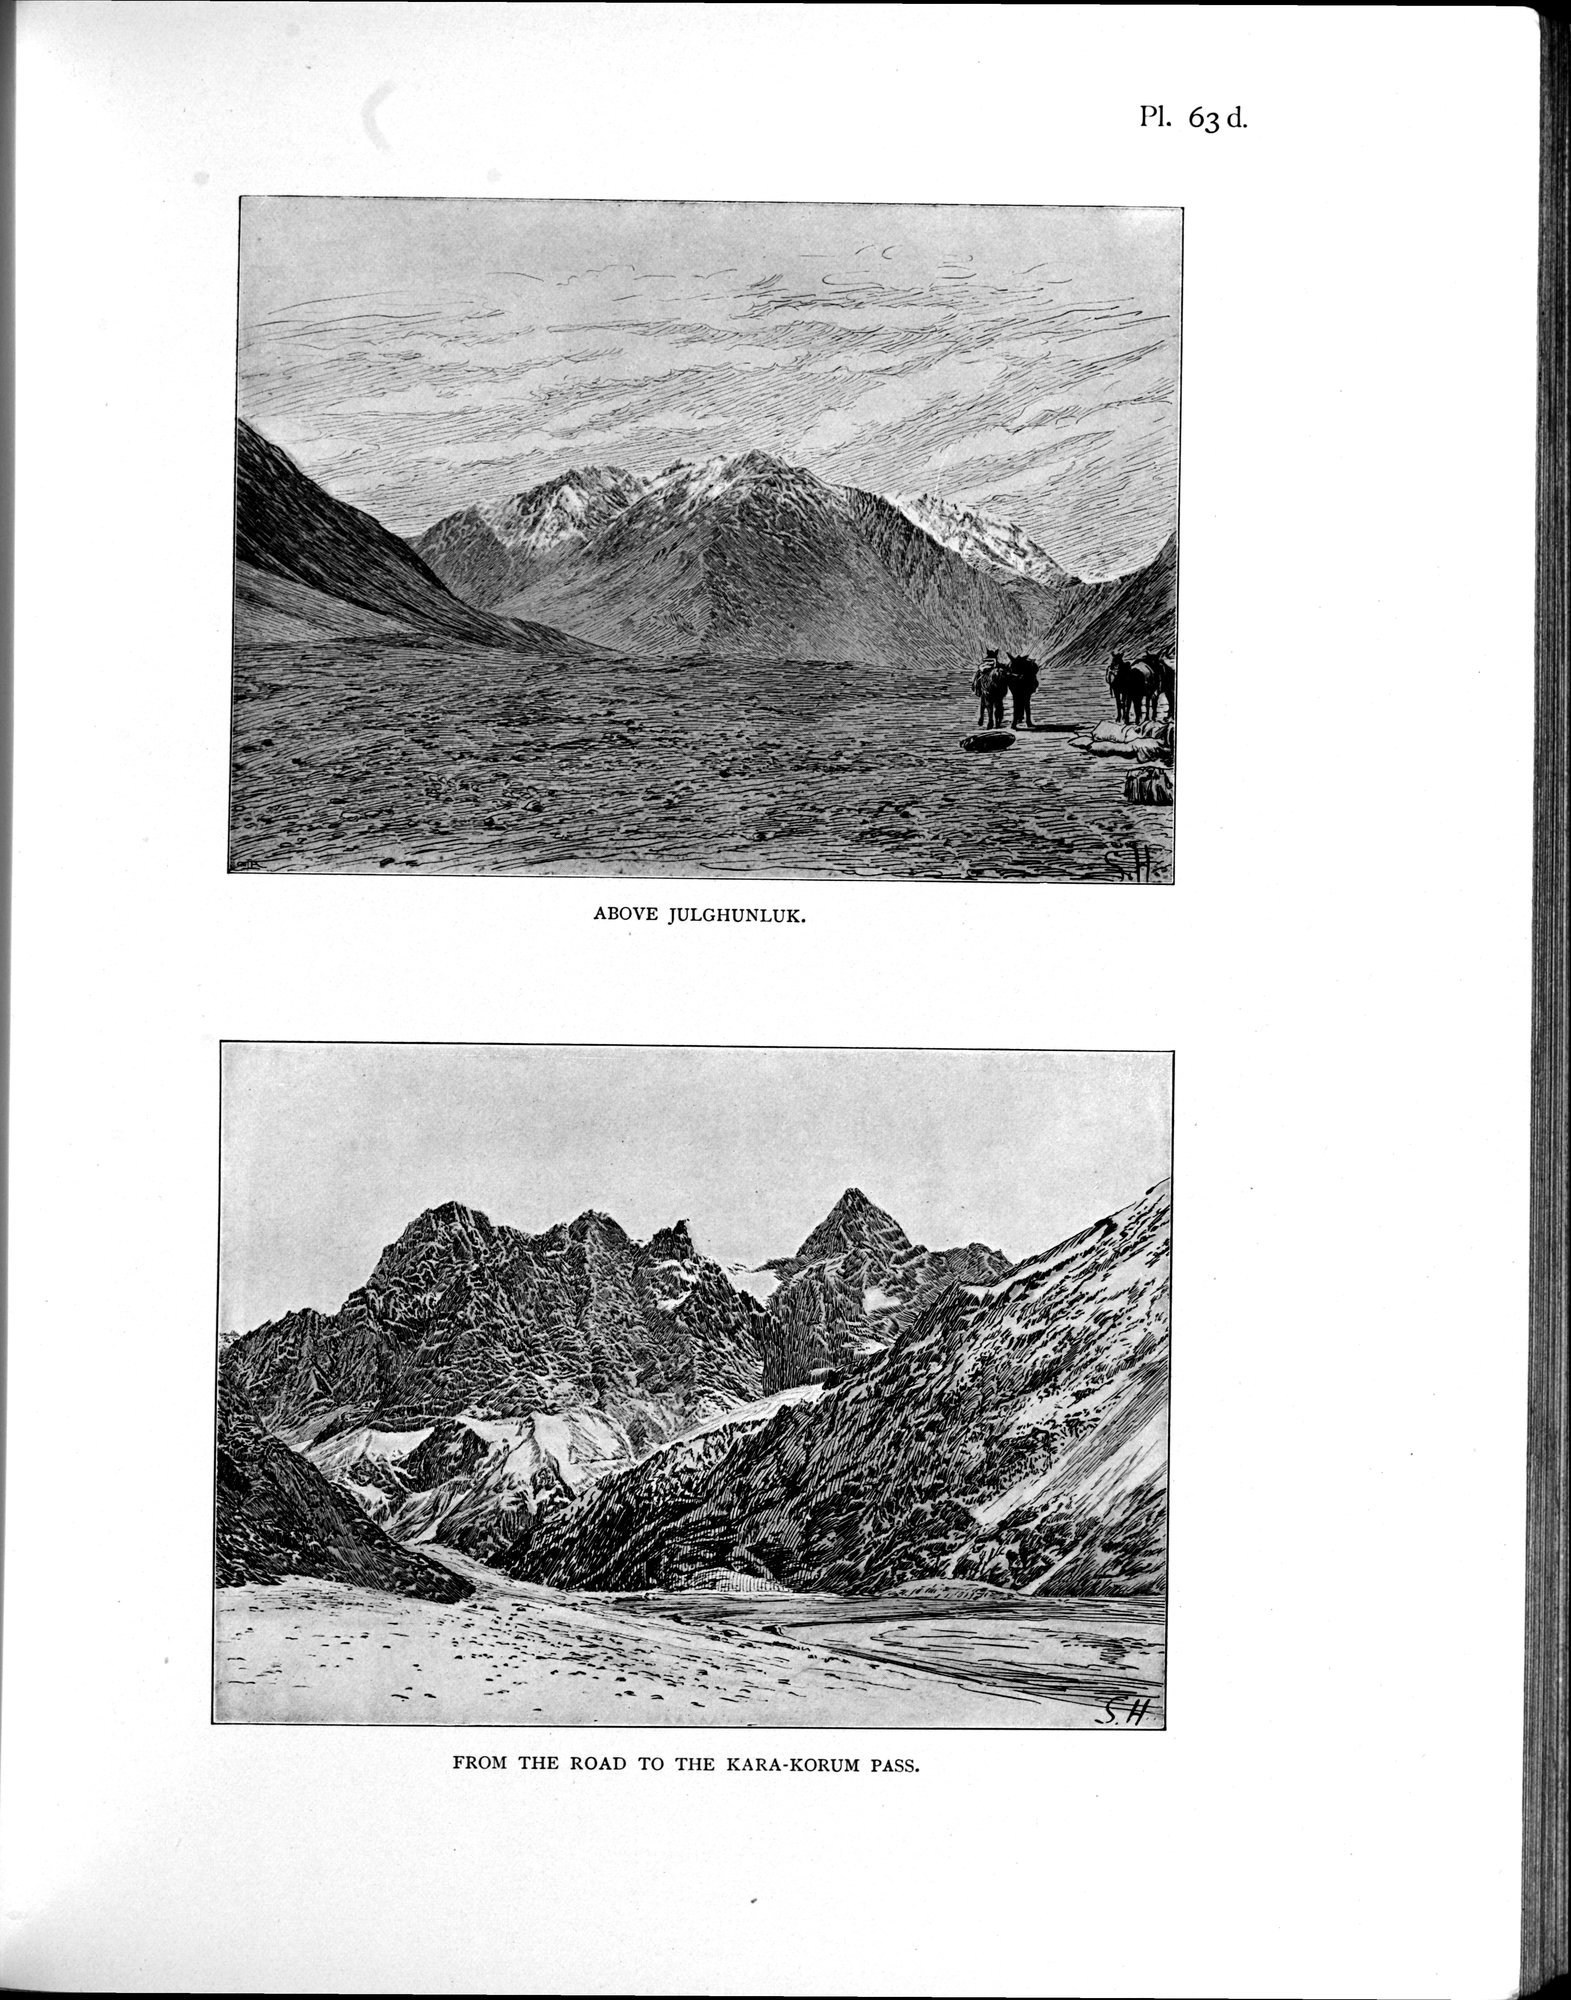 Scientific Results of a Journey in Central Asia, 1899-1902 : vol.4 / 581 ページ（白黒高解像度画像）